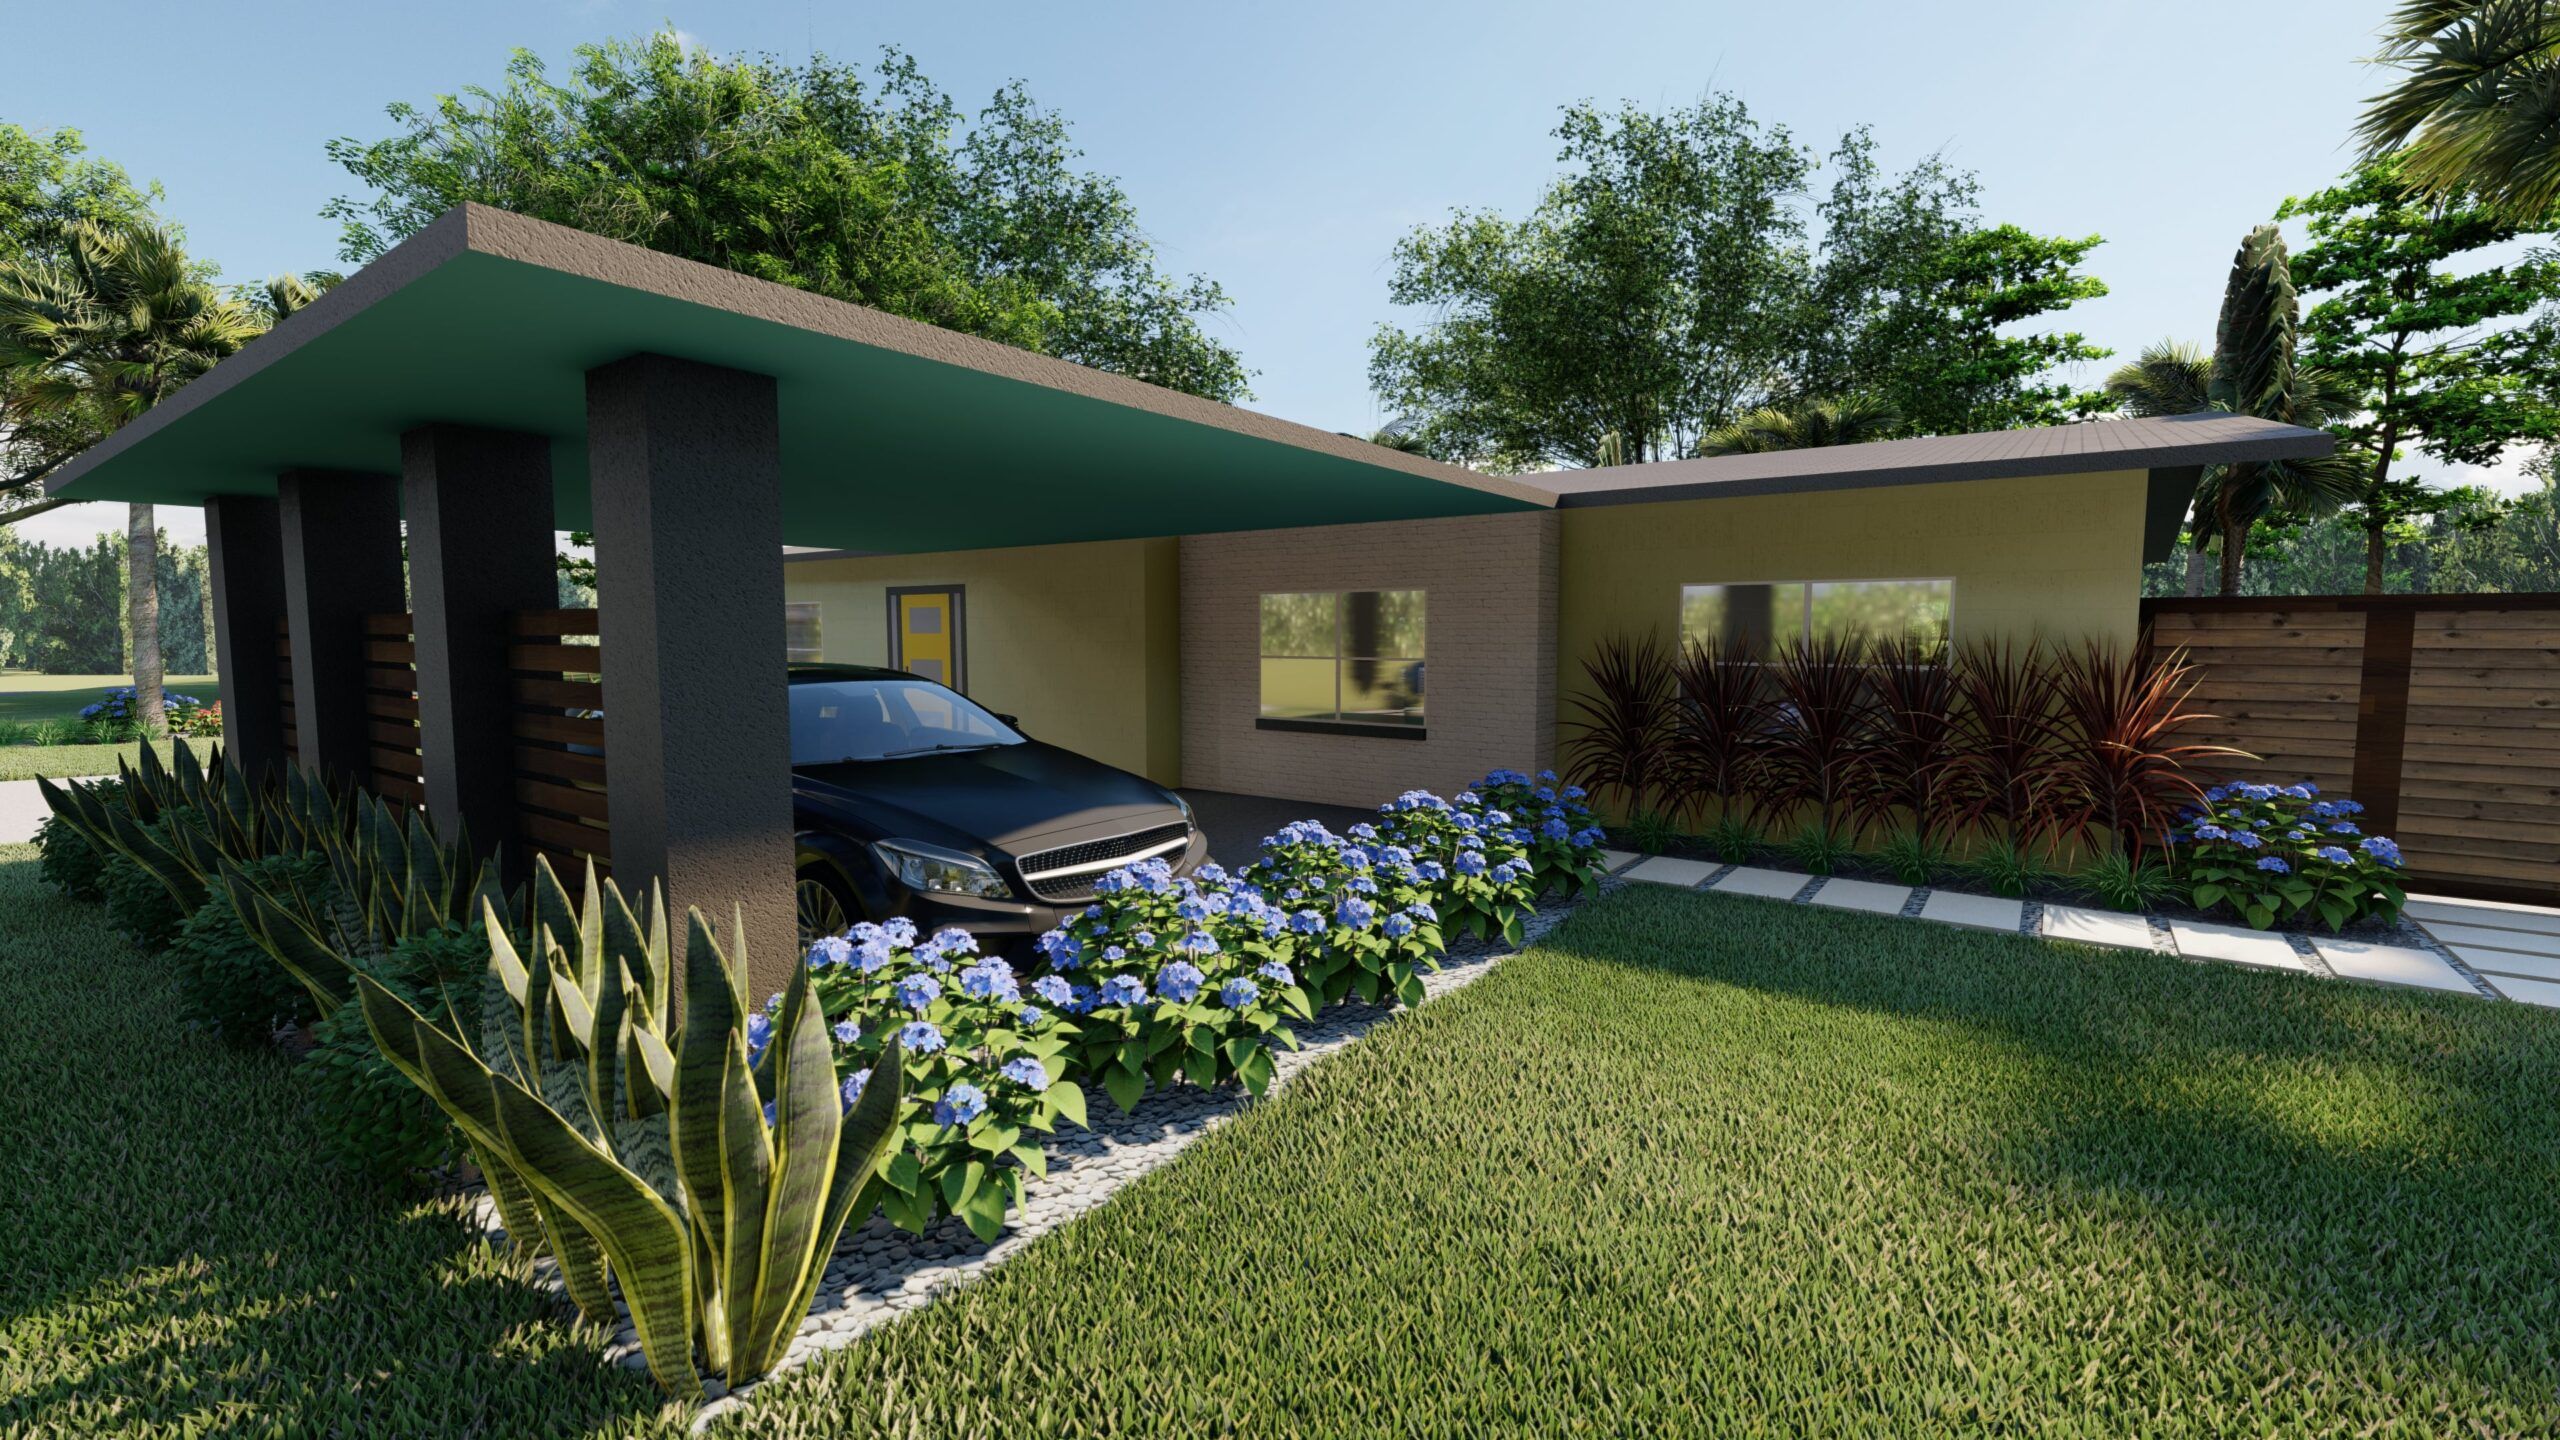 Florida front yard landscaping design for a car port with a garden and lawn around it